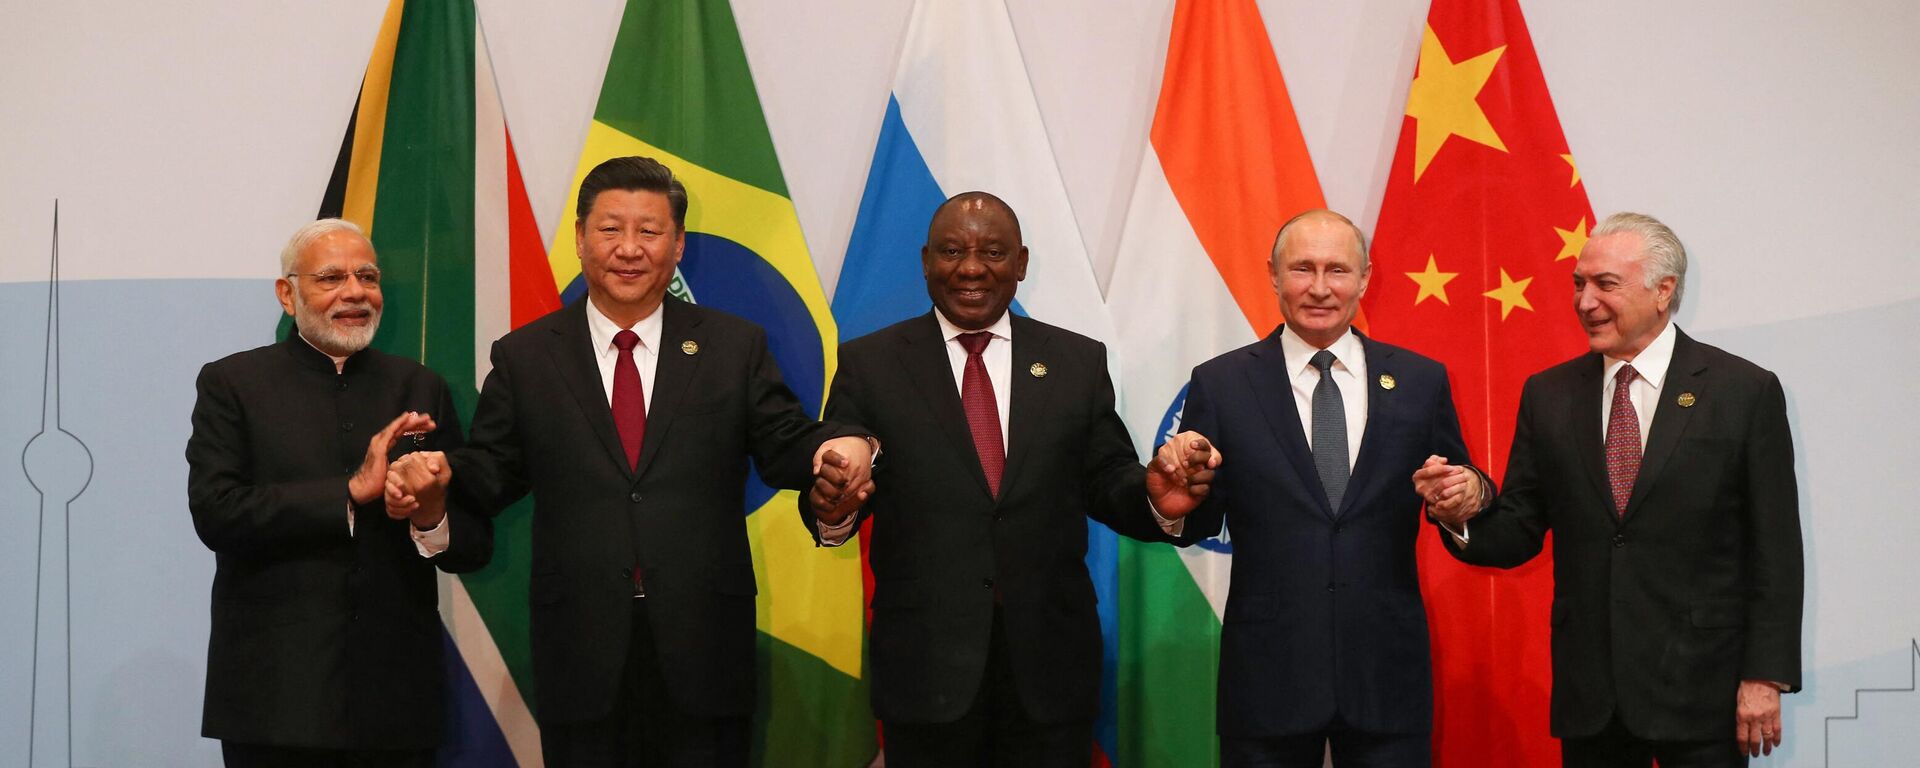 India's Prime Minister Narendra Modi, China's President Xi Jinping, South Africa's President Cyril Ramaphosa, Russia's President Vladimir Putin and Brazil's President Michel Temer pose for a group picture during the 10th BRICS summit on July 26, 2018 at the Sandton Convention Centre in Johannesburg, South Africa.  - Sputnik Africa, 1920, 14.04.2023